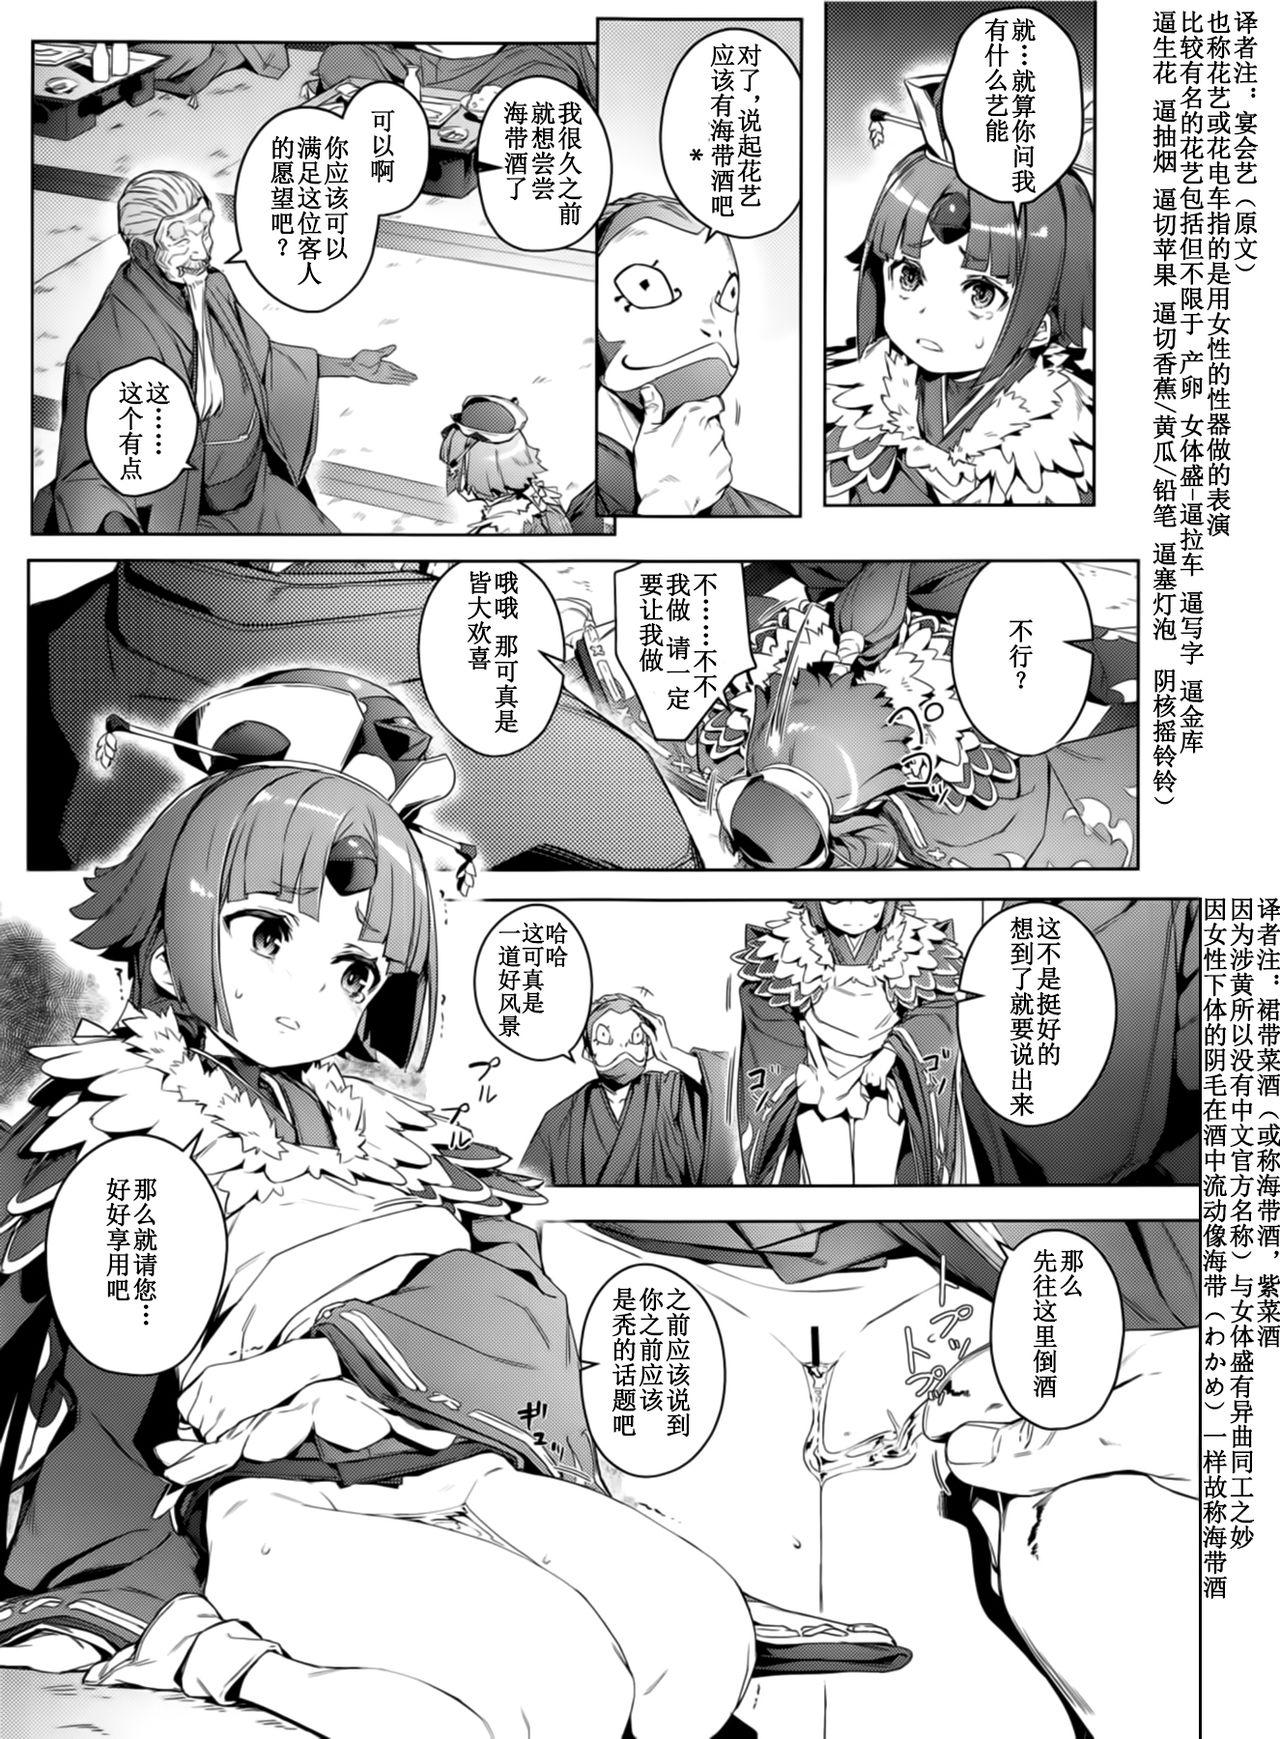 Webcamshow Suzume no Namida - Fate grand order Amature - Page 7